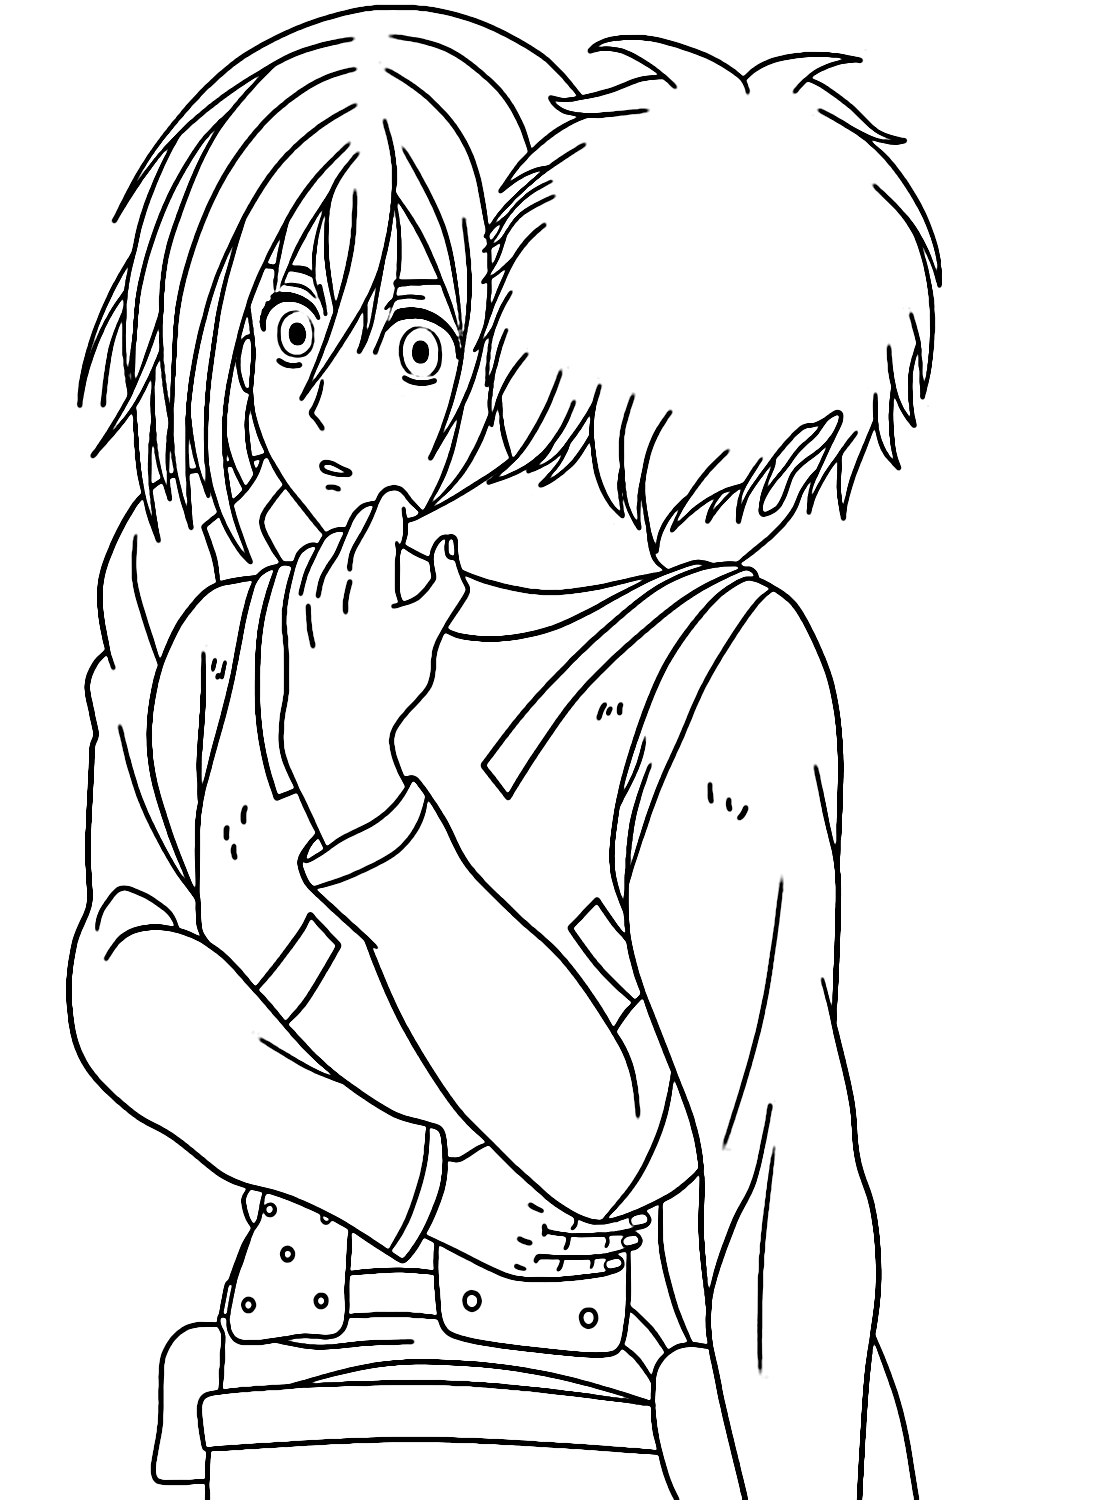 Mikasa and Eren Coloring Pages